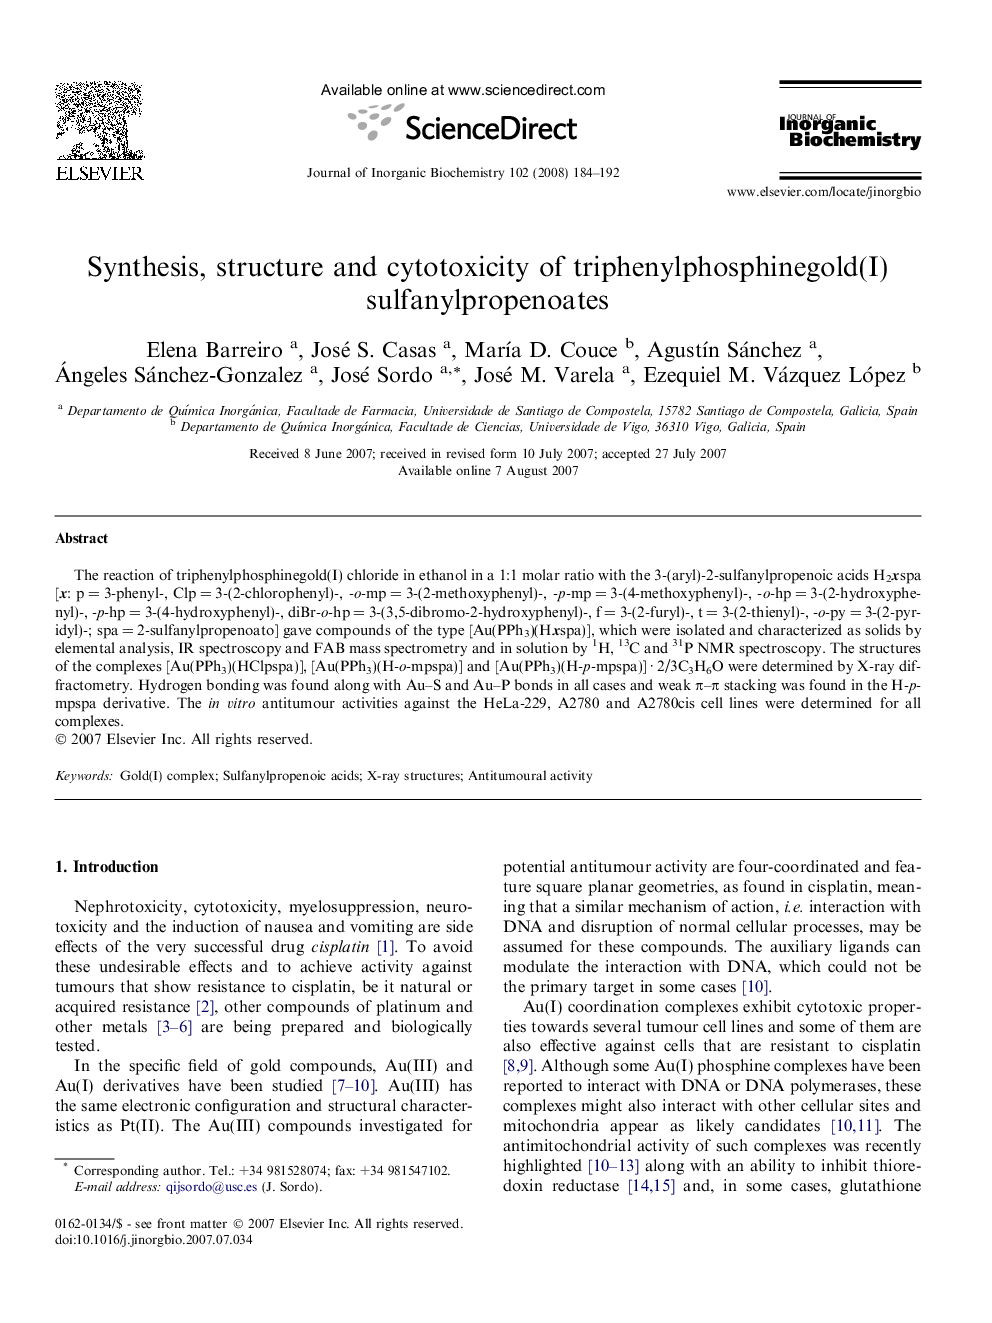 Synthesis, structure and cytotoxicity of triphenylphosphinegold(I) sulfanylpropenoates